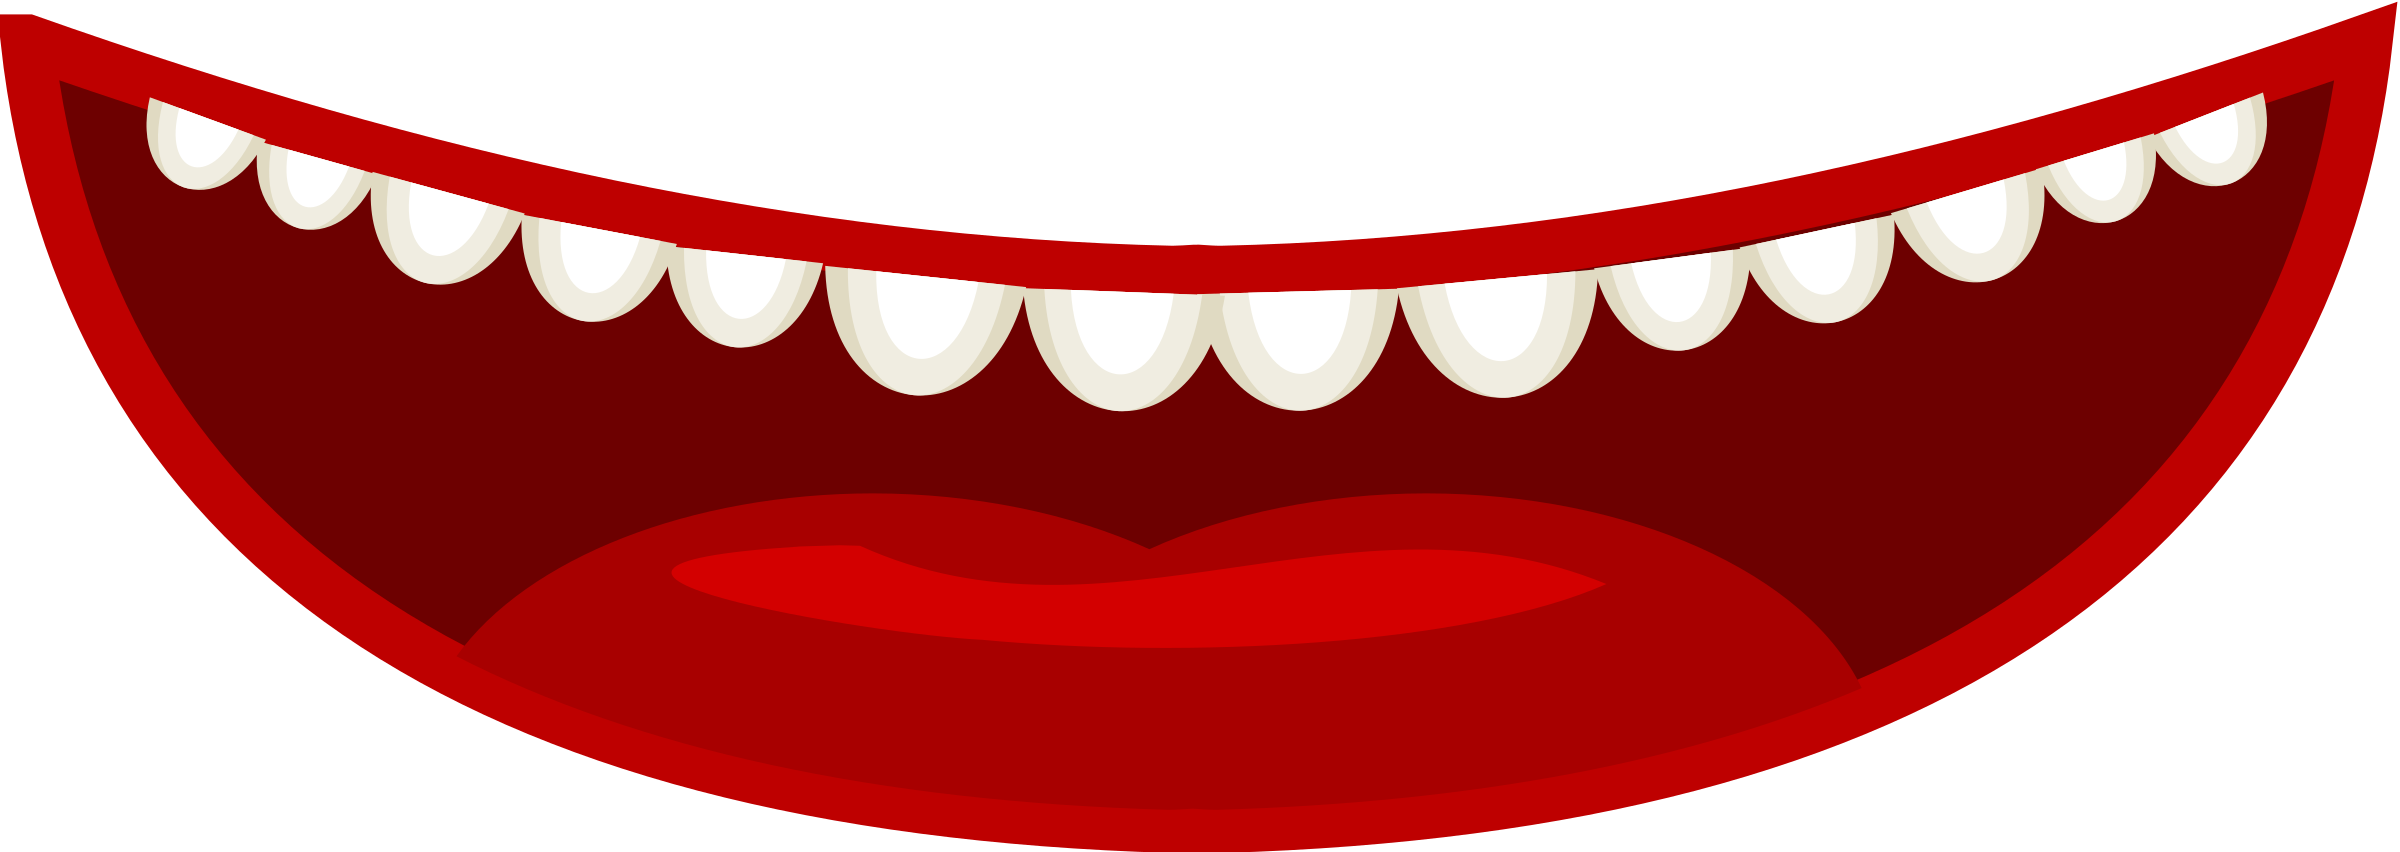 Animated Mouth 